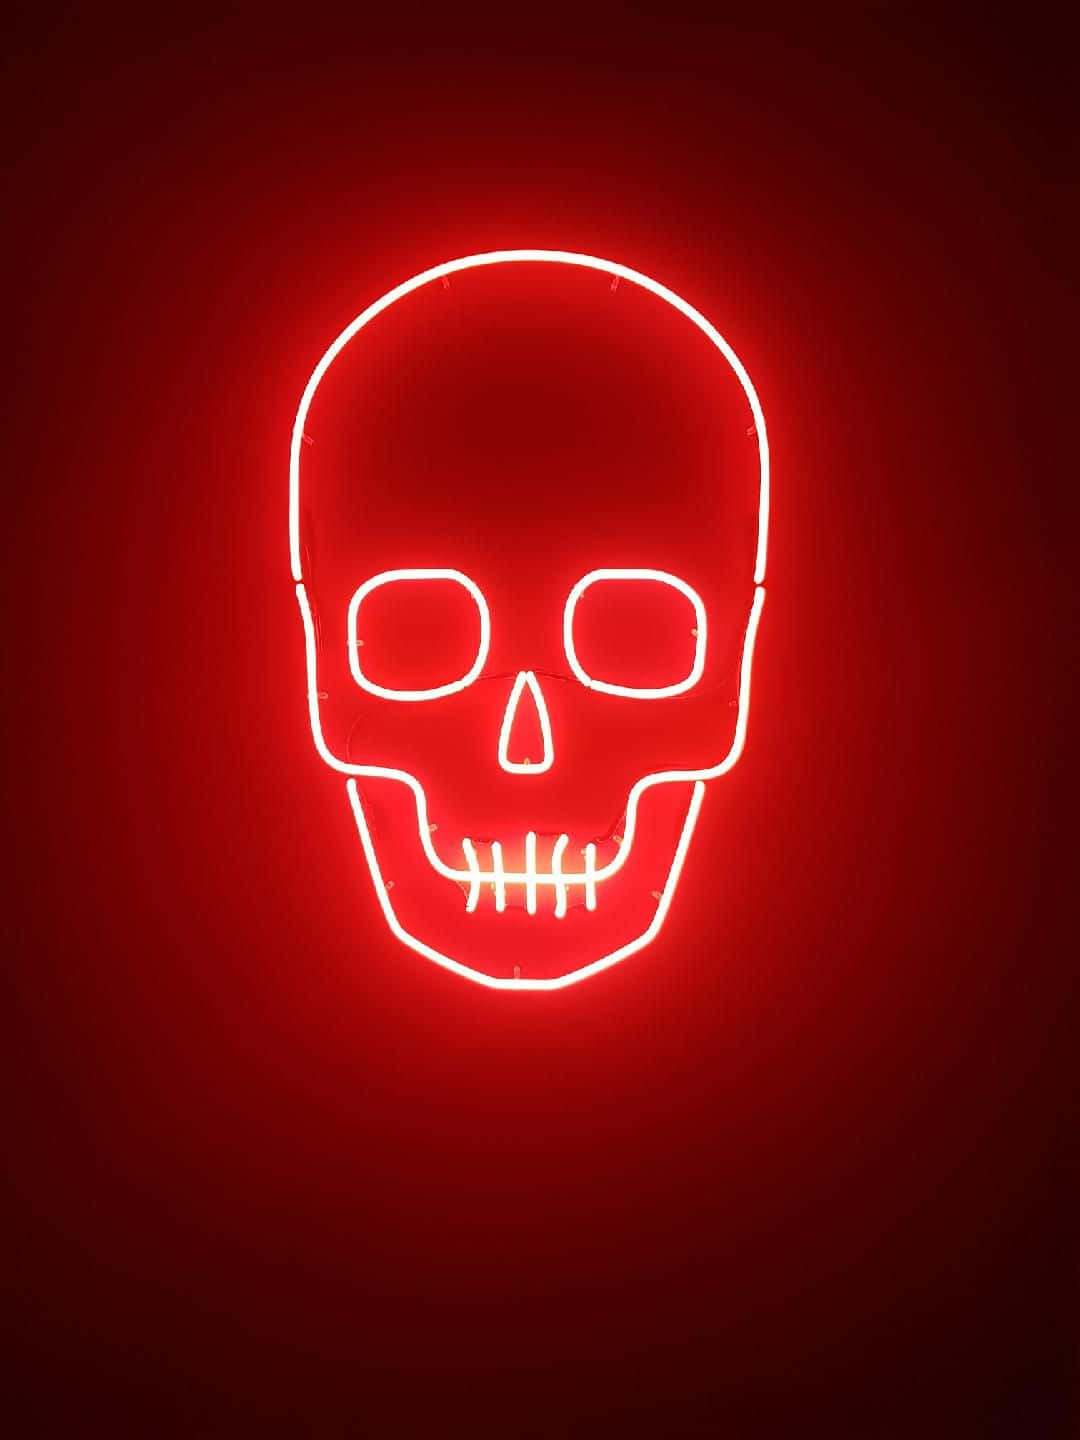 A stunning red neon aesthetic Wallpaper